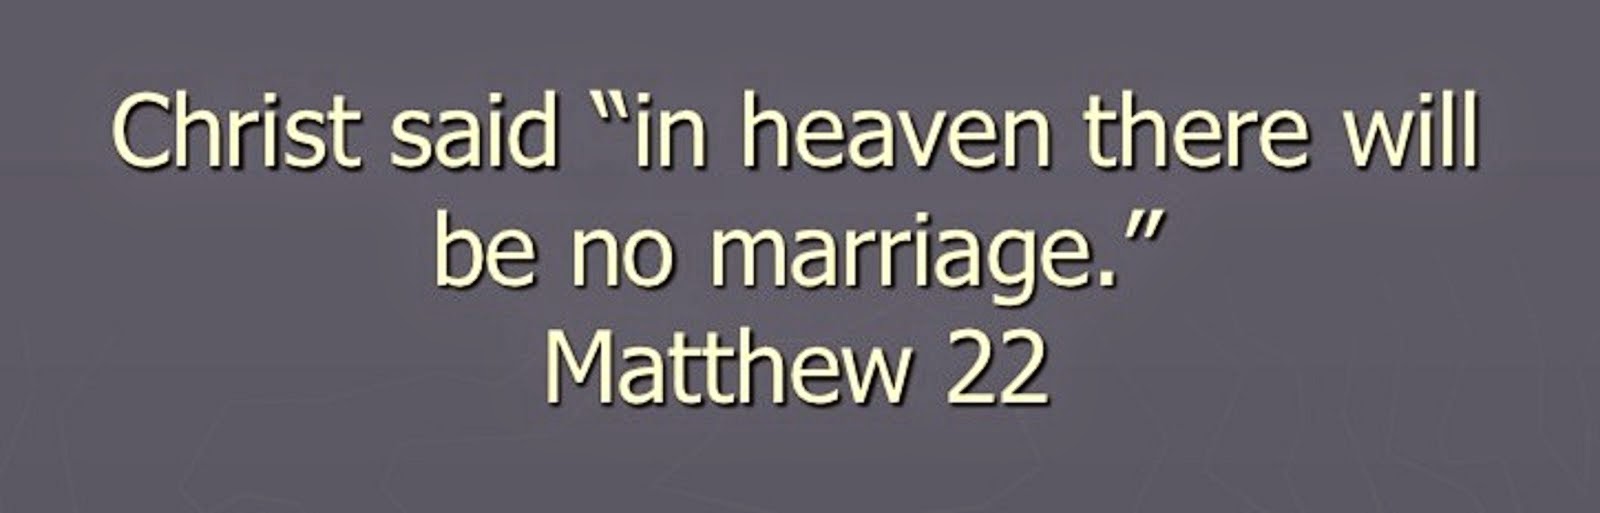 CHRIST SAID. "IN HEAVEN THERE WILL BE NO MARRIAGE."   MATTHEW 22